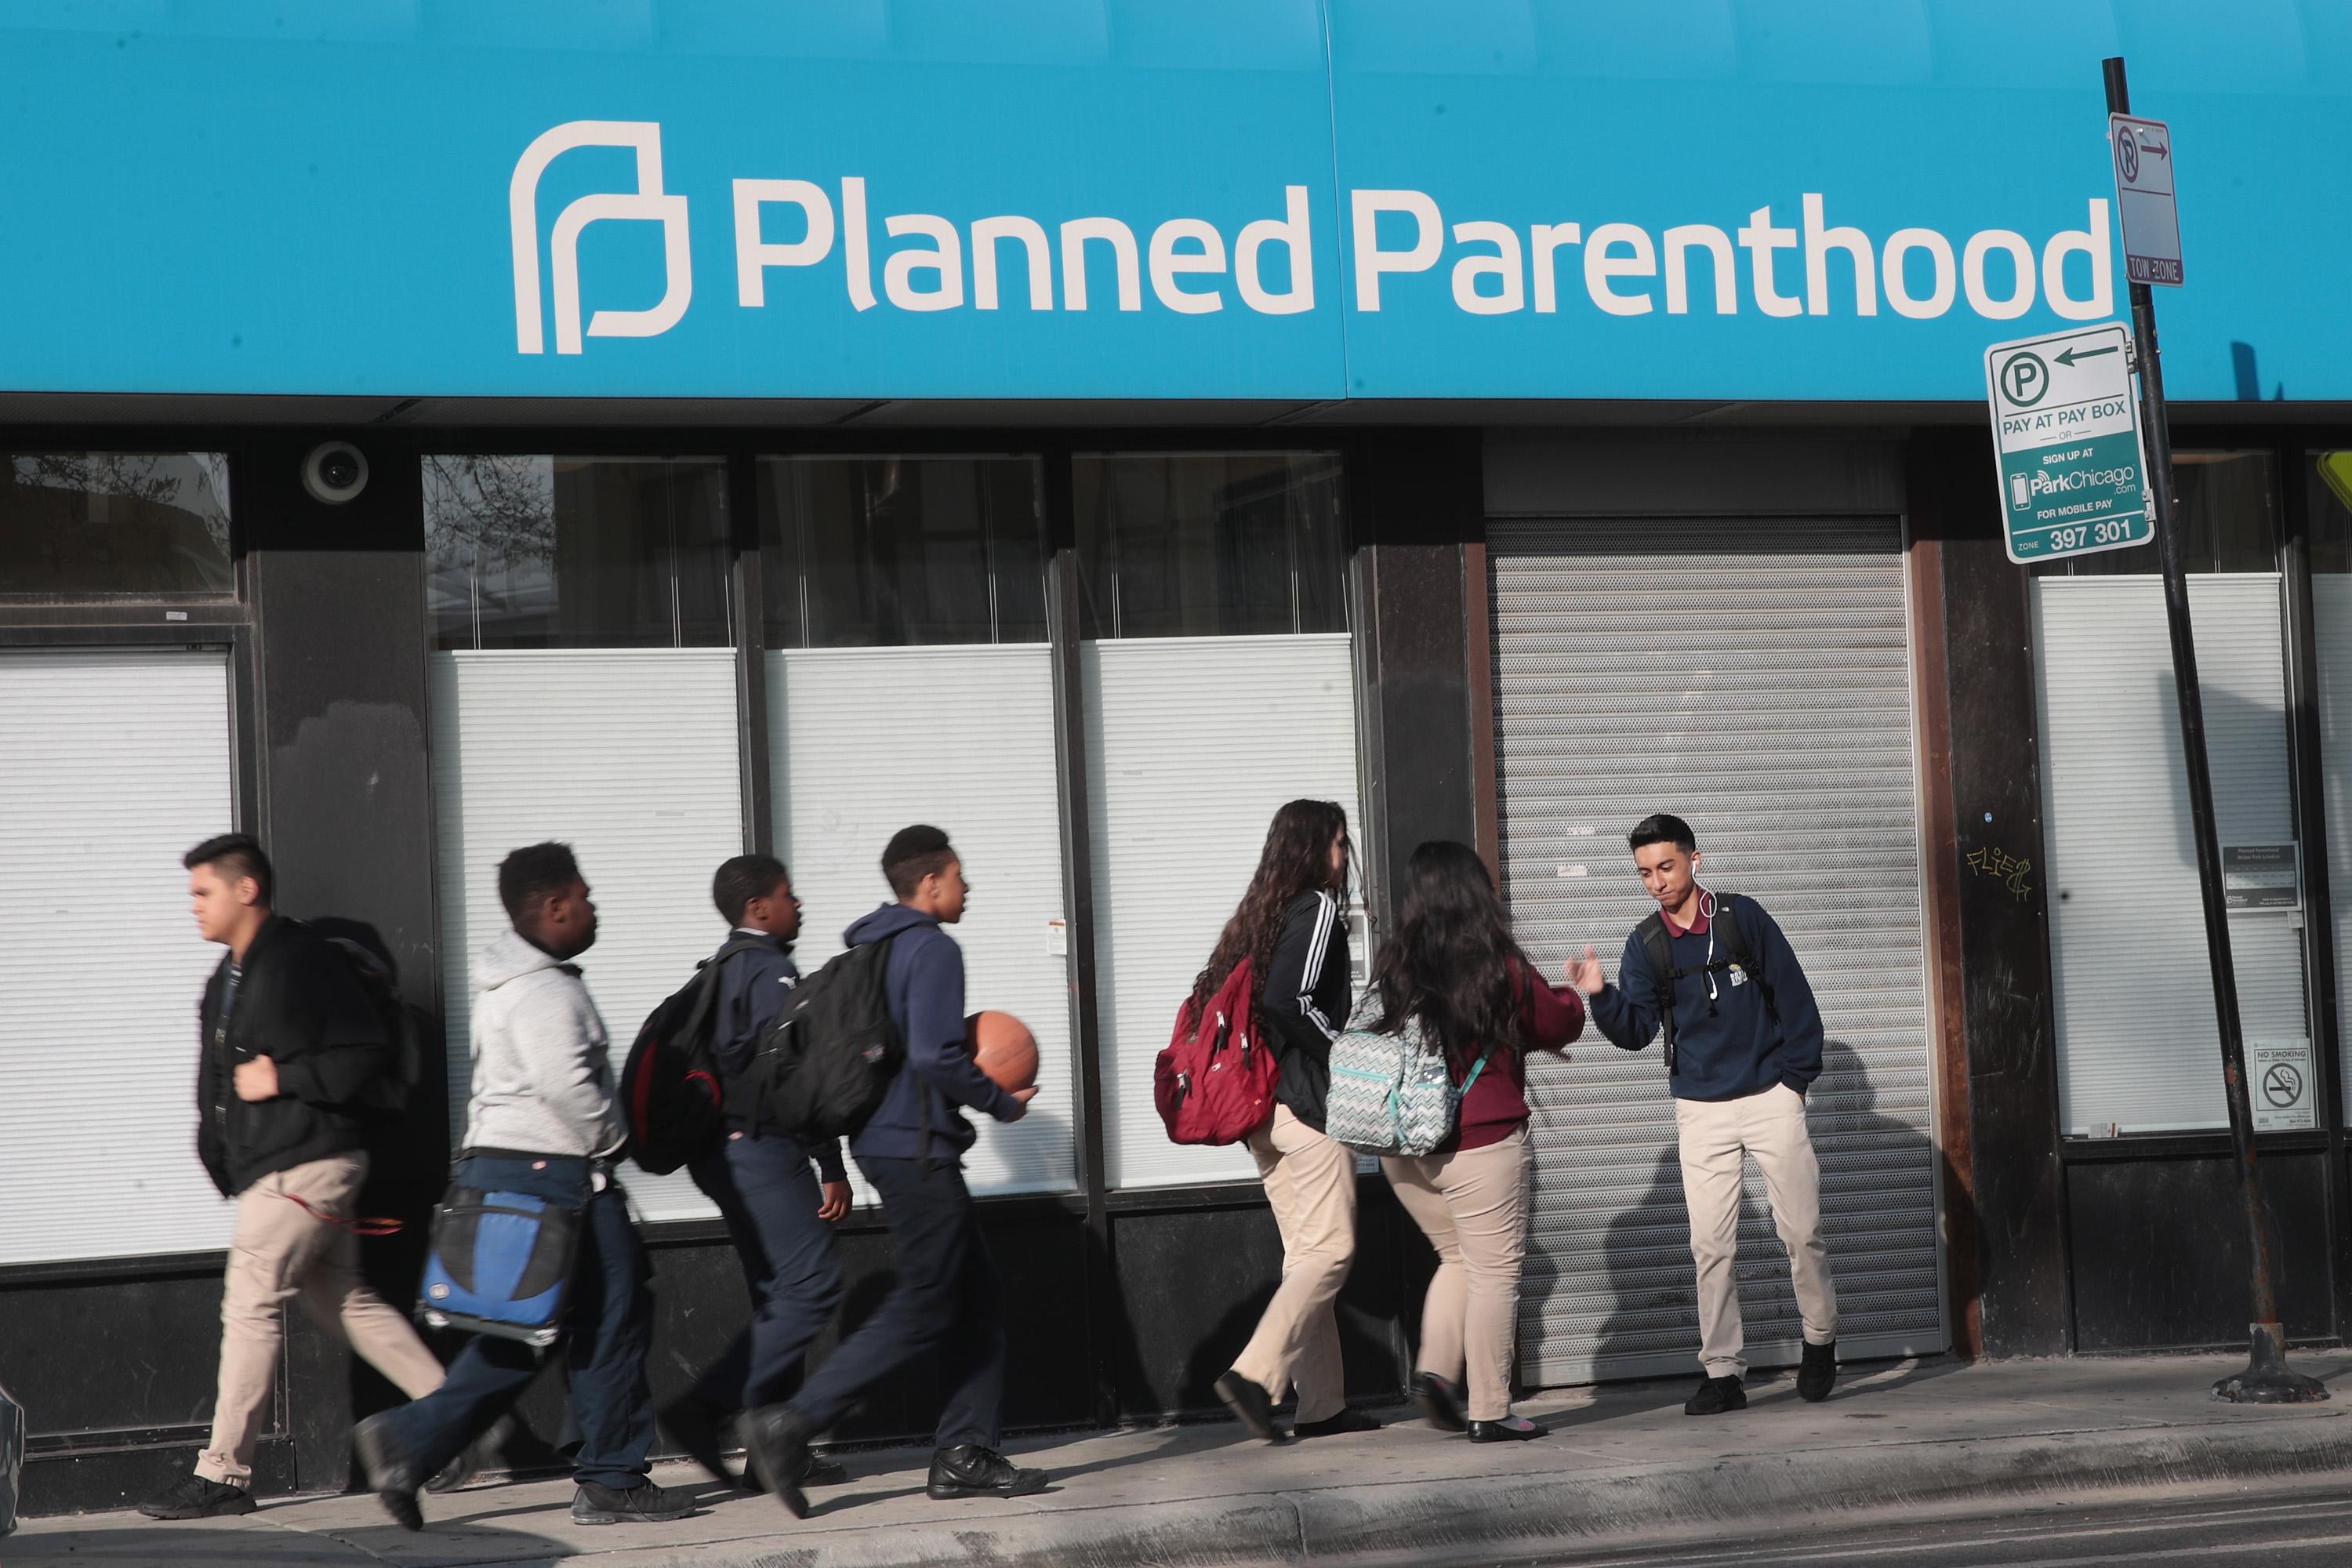 CHICAGO, IL - MAY 18:  Pedestrians walk past a Planned Parenthood clinic on May 18, 2018 in Chicago, Illinois. The Trump administration is expected to announce a plan for massive funding cuts to Planned Parenthood and other taxpayer-backed abortion providers by reinstating a Reagan-era rule that prohibits federal funding from going to clinics that discuss abortion with women or that share space with abortion providers.  (Photo by Scott Olson/Getty Images)